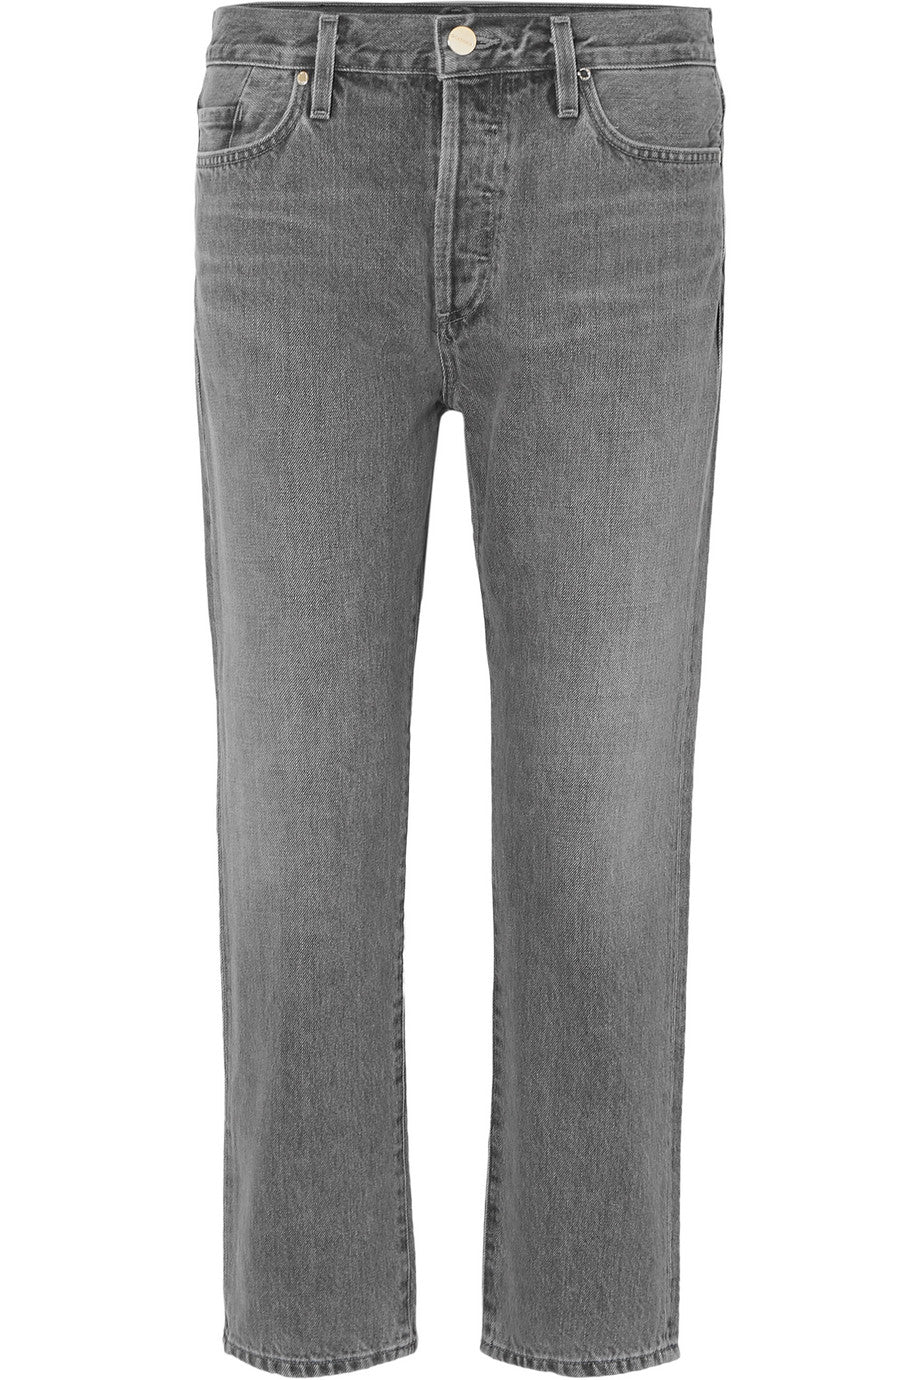 Goldsign - 'The low slung' grey gray denim cropped mid-rise straight-leg jeans